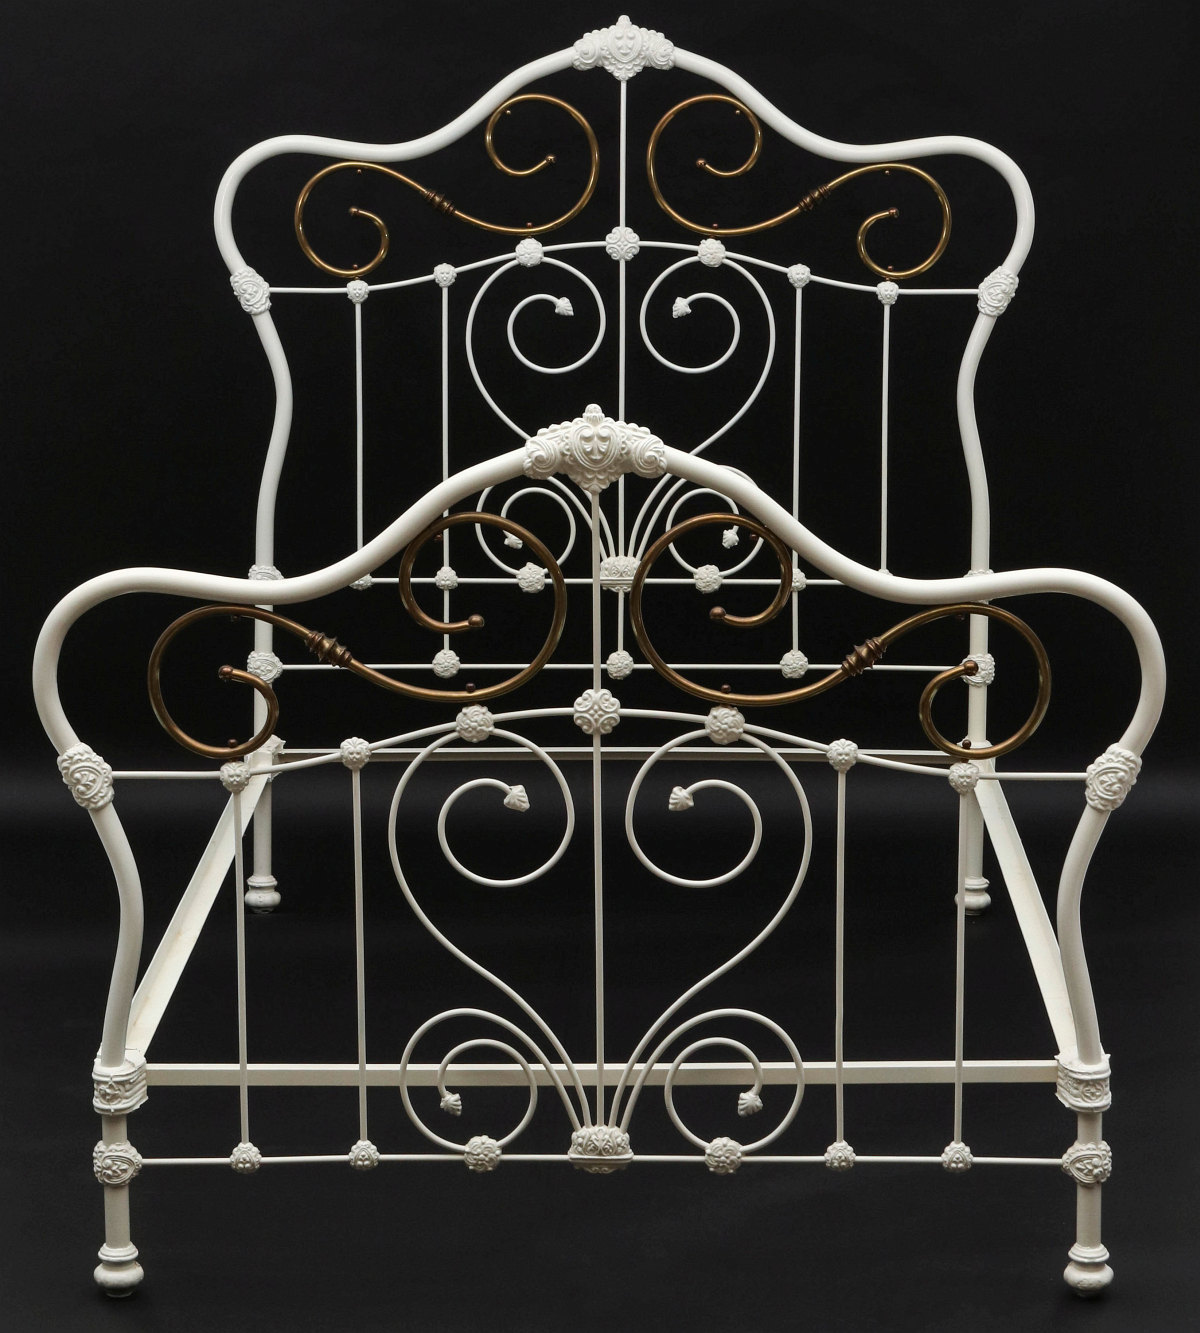 AN EXCEPTIONAL ORNATE IRON BED WITH BRASS EMBELLISHMENT